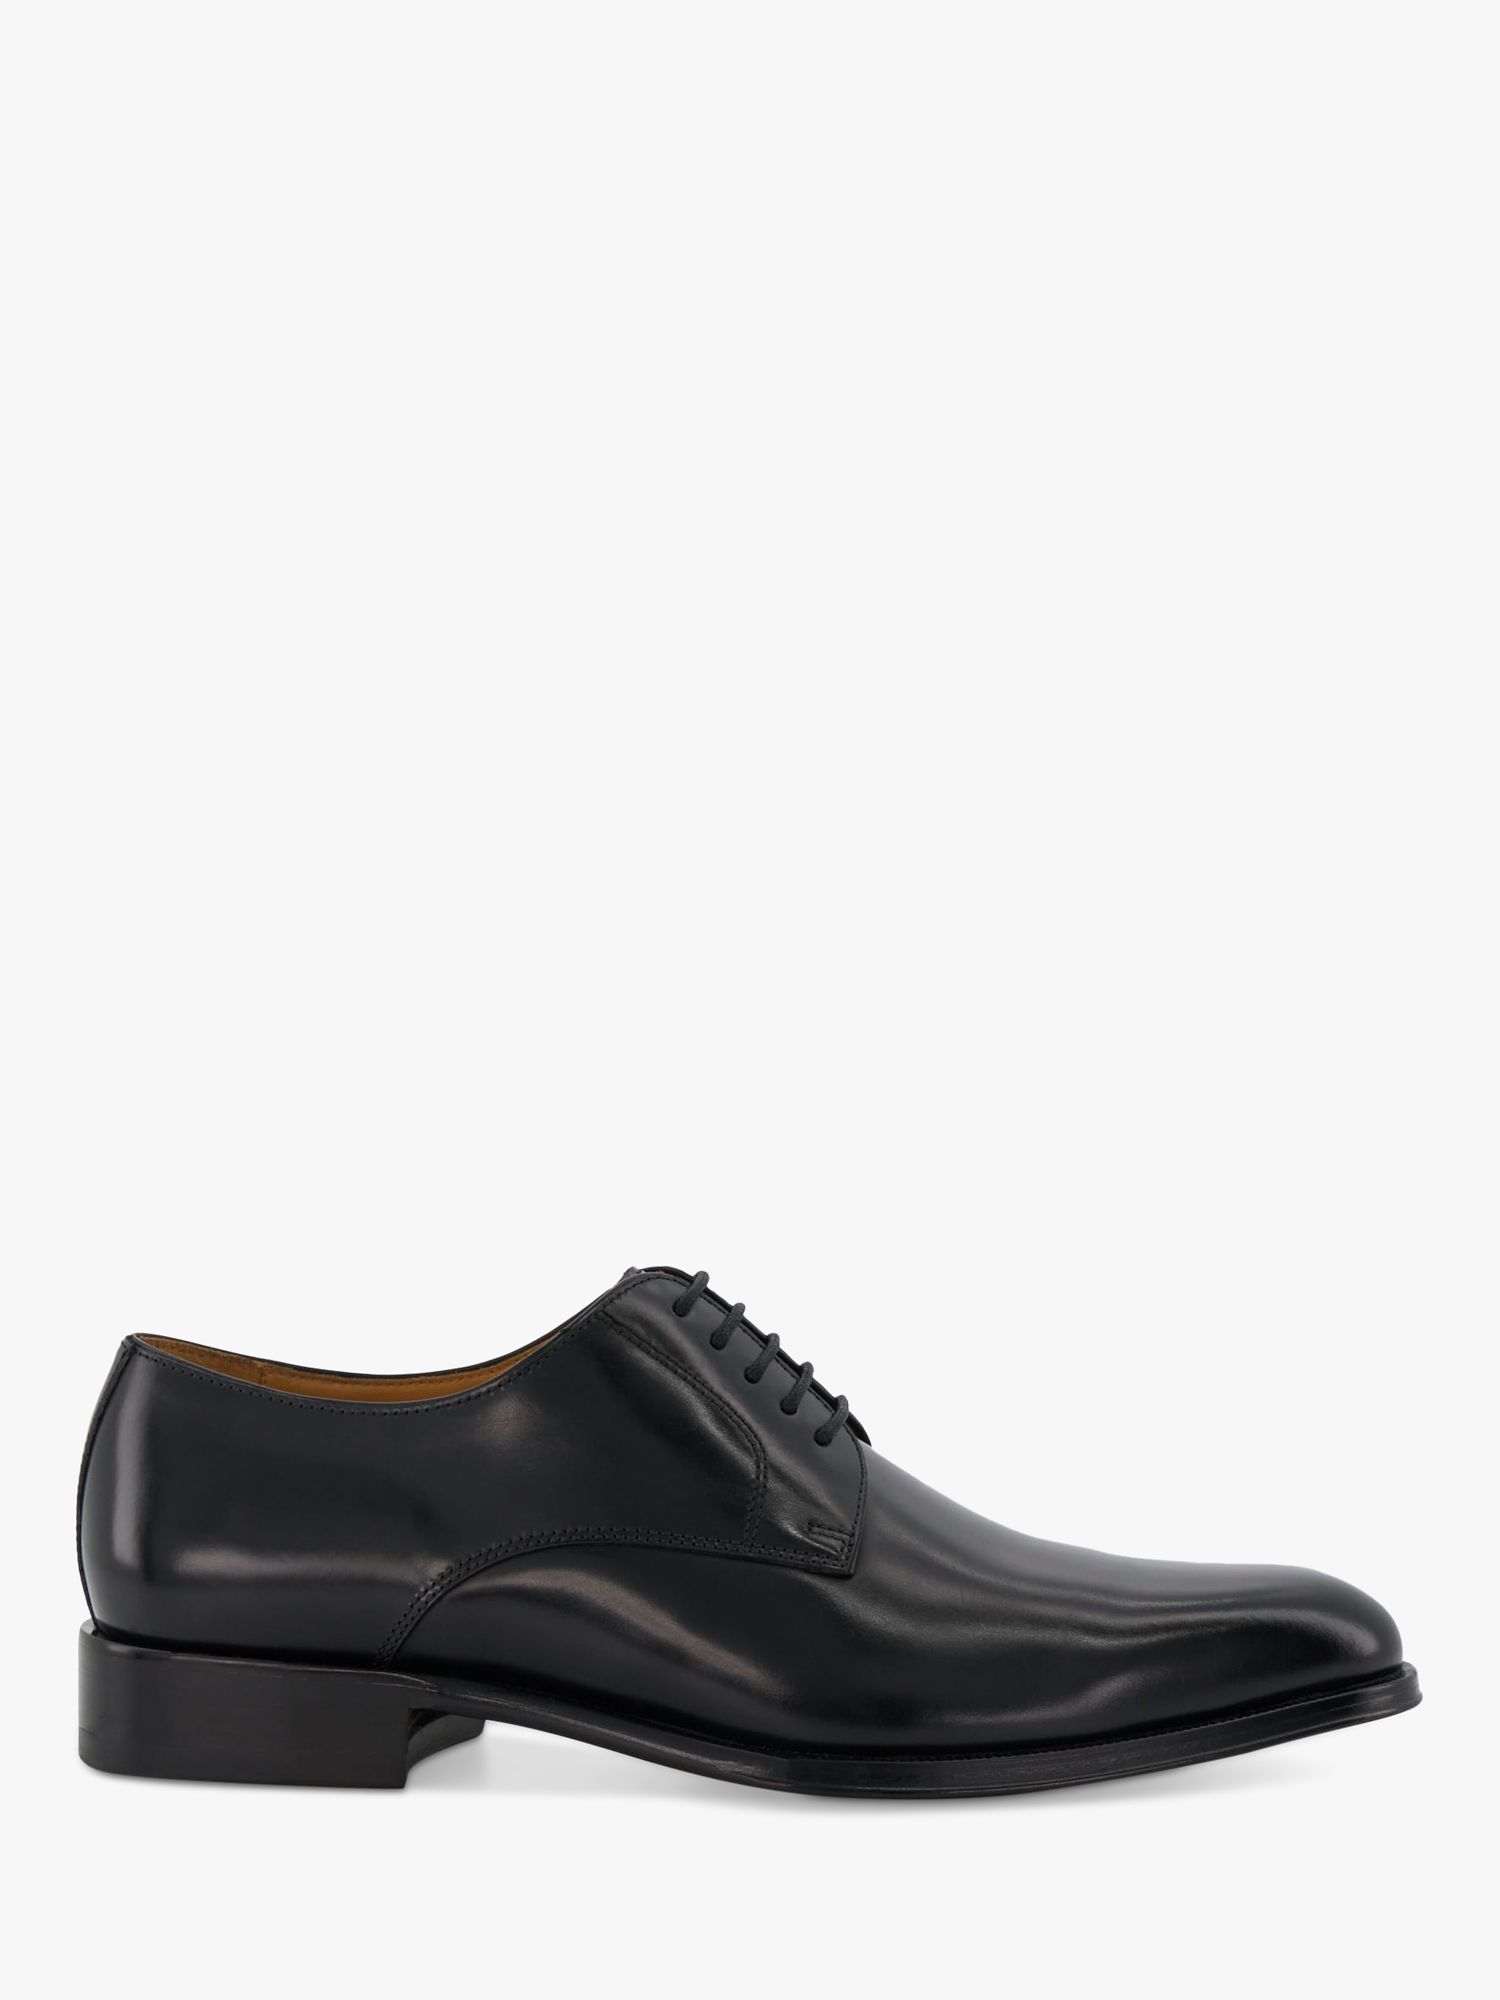 Dune Salisburry Derby Leather Shoes, Black at John Lewis & Partners